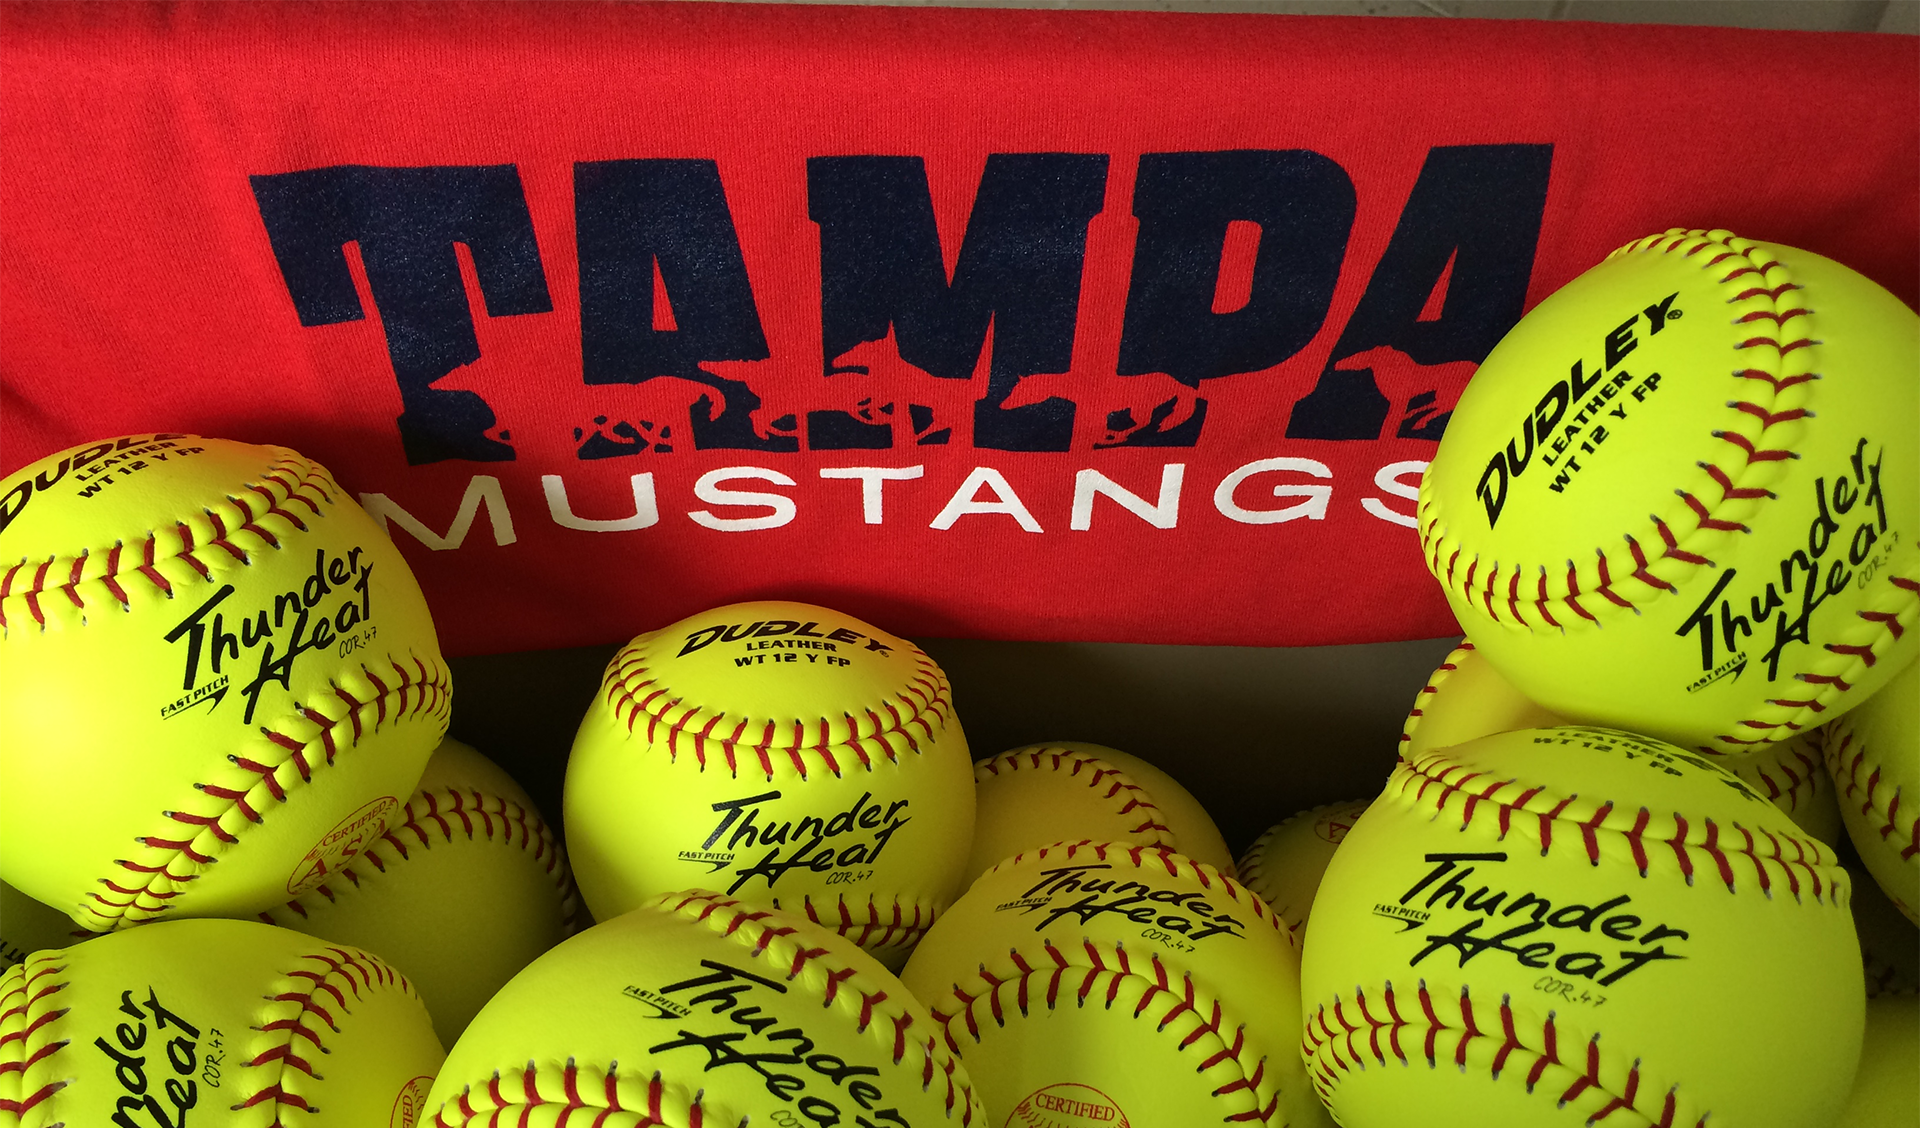 The 18u Tampa Mustangs softball program won three titles at the Disney Atlantic Citrus Classic held at the Wide World of Sports Complex last weekend.  Winning the tournament gives all three teams a berth in next year’s Amateur Softball Association Hall of Fame Tournament….